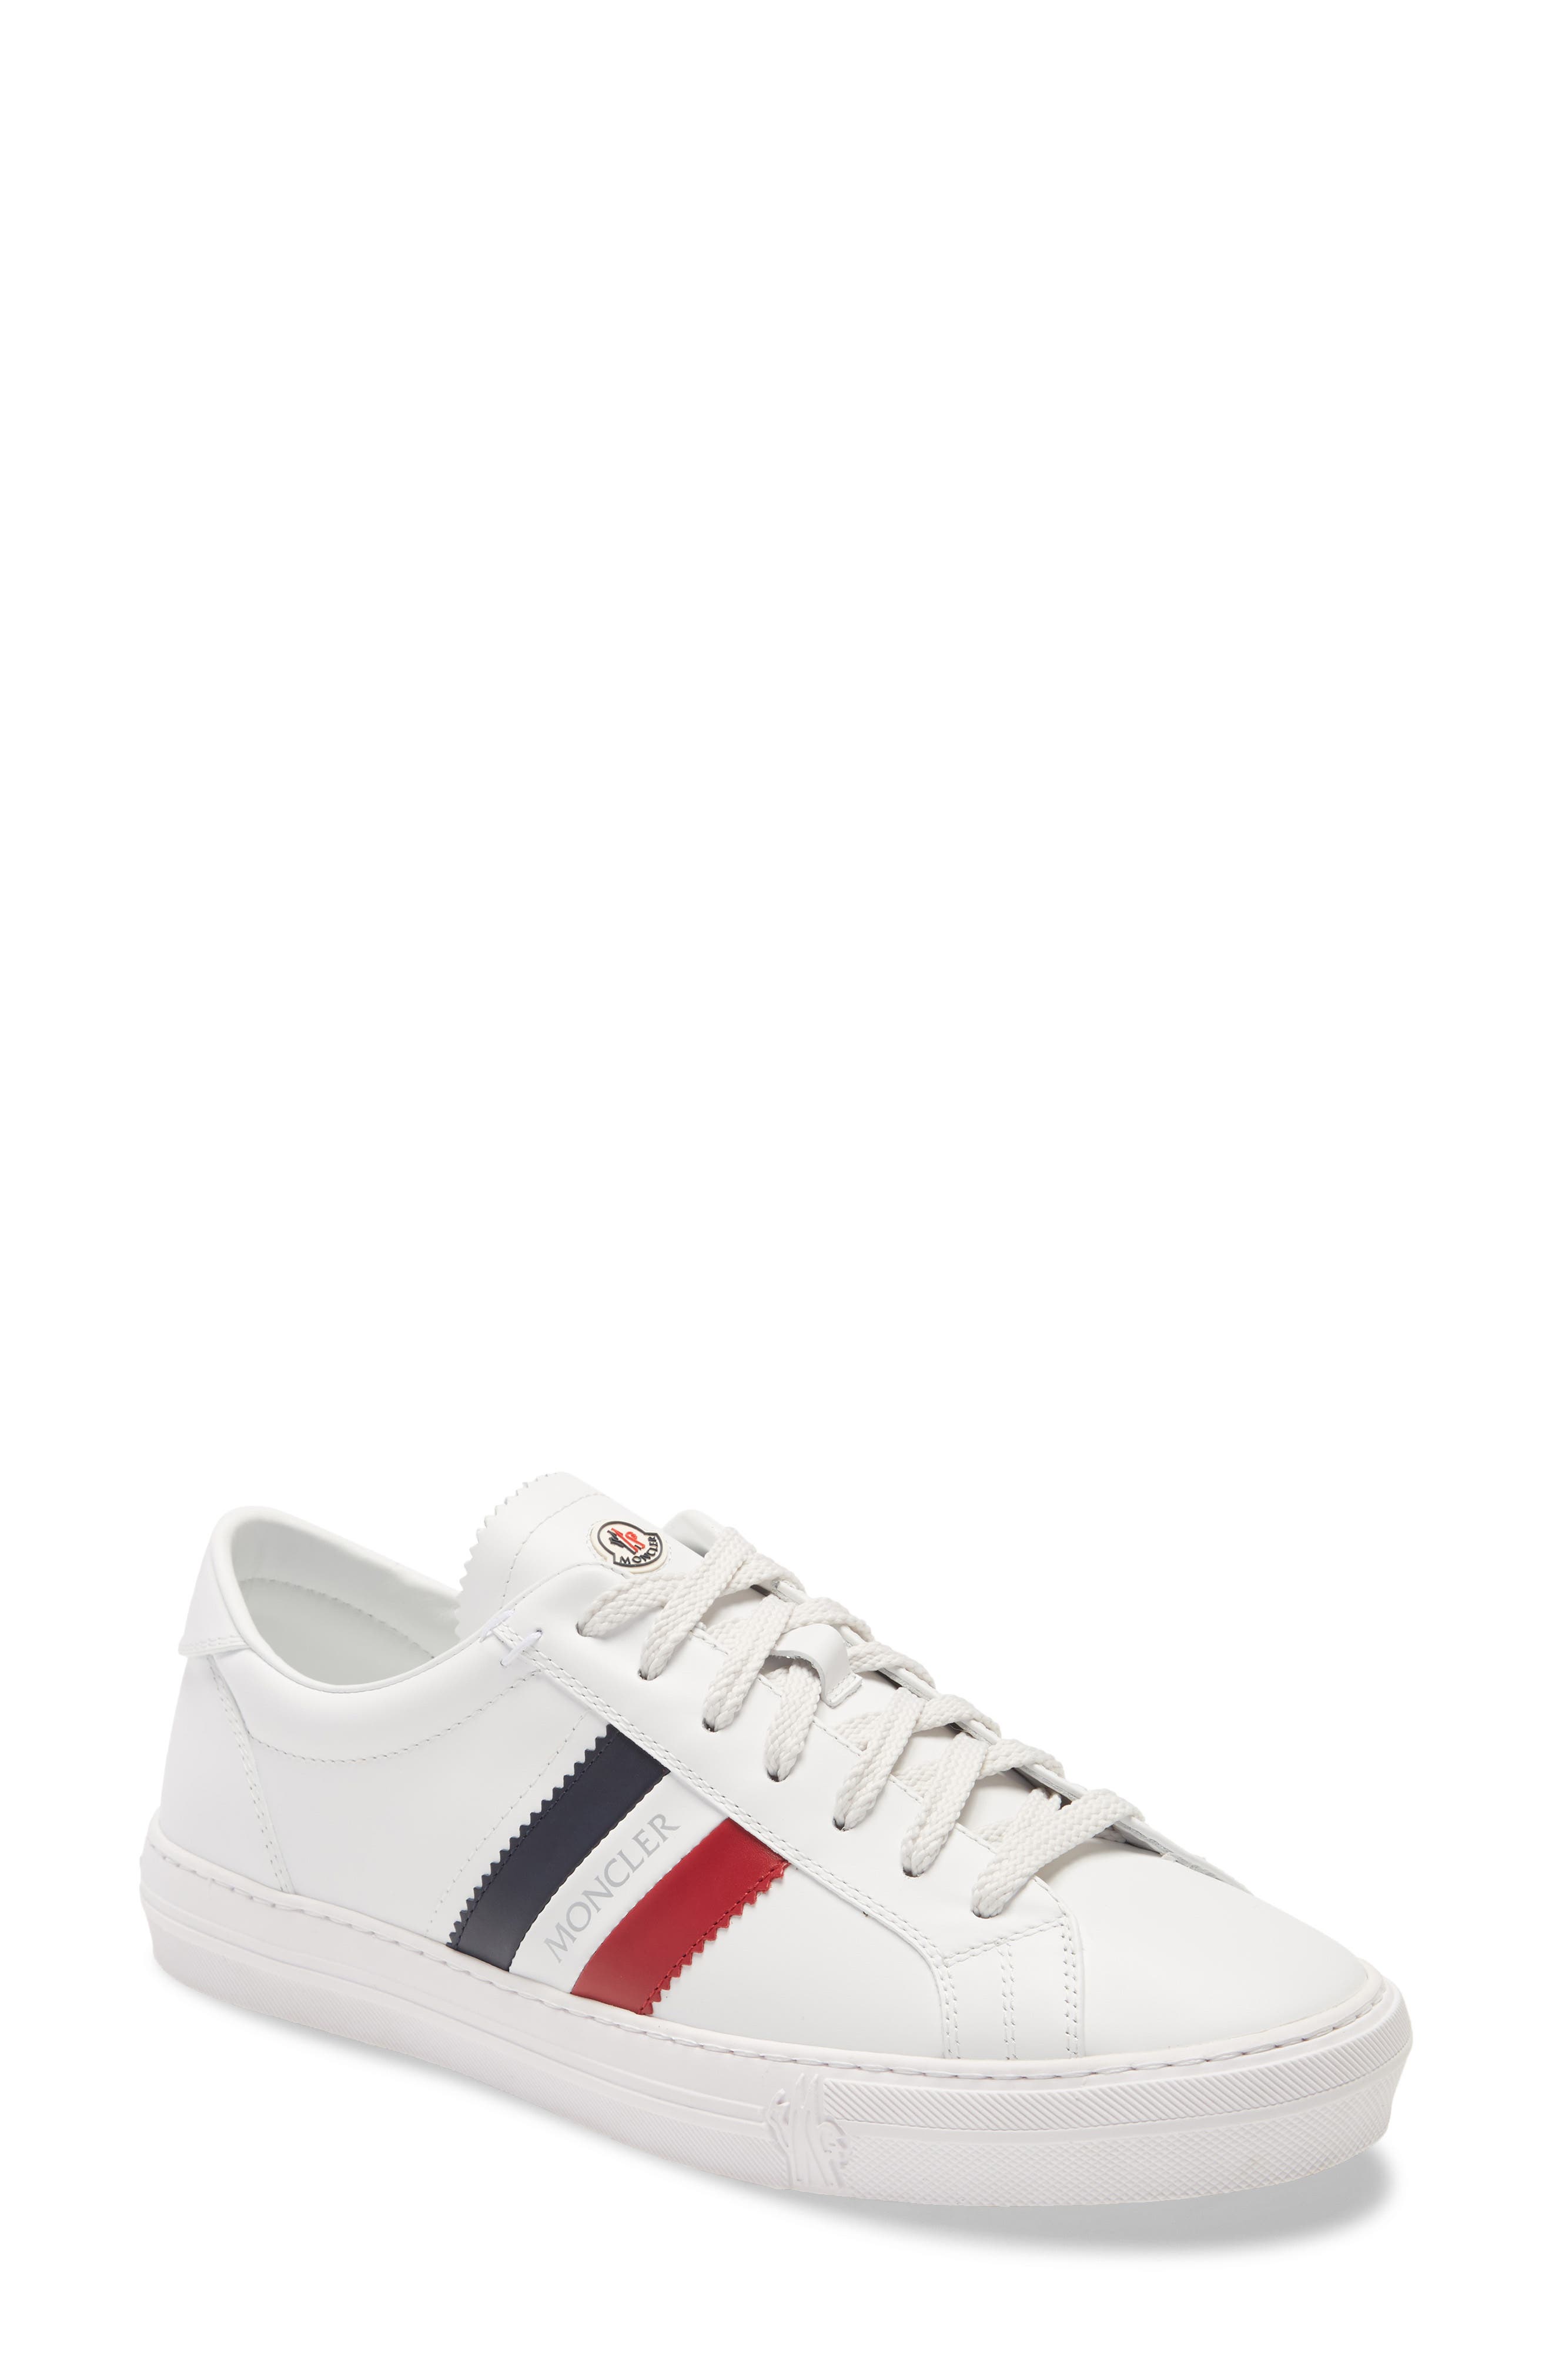 moncler shoes sneakers